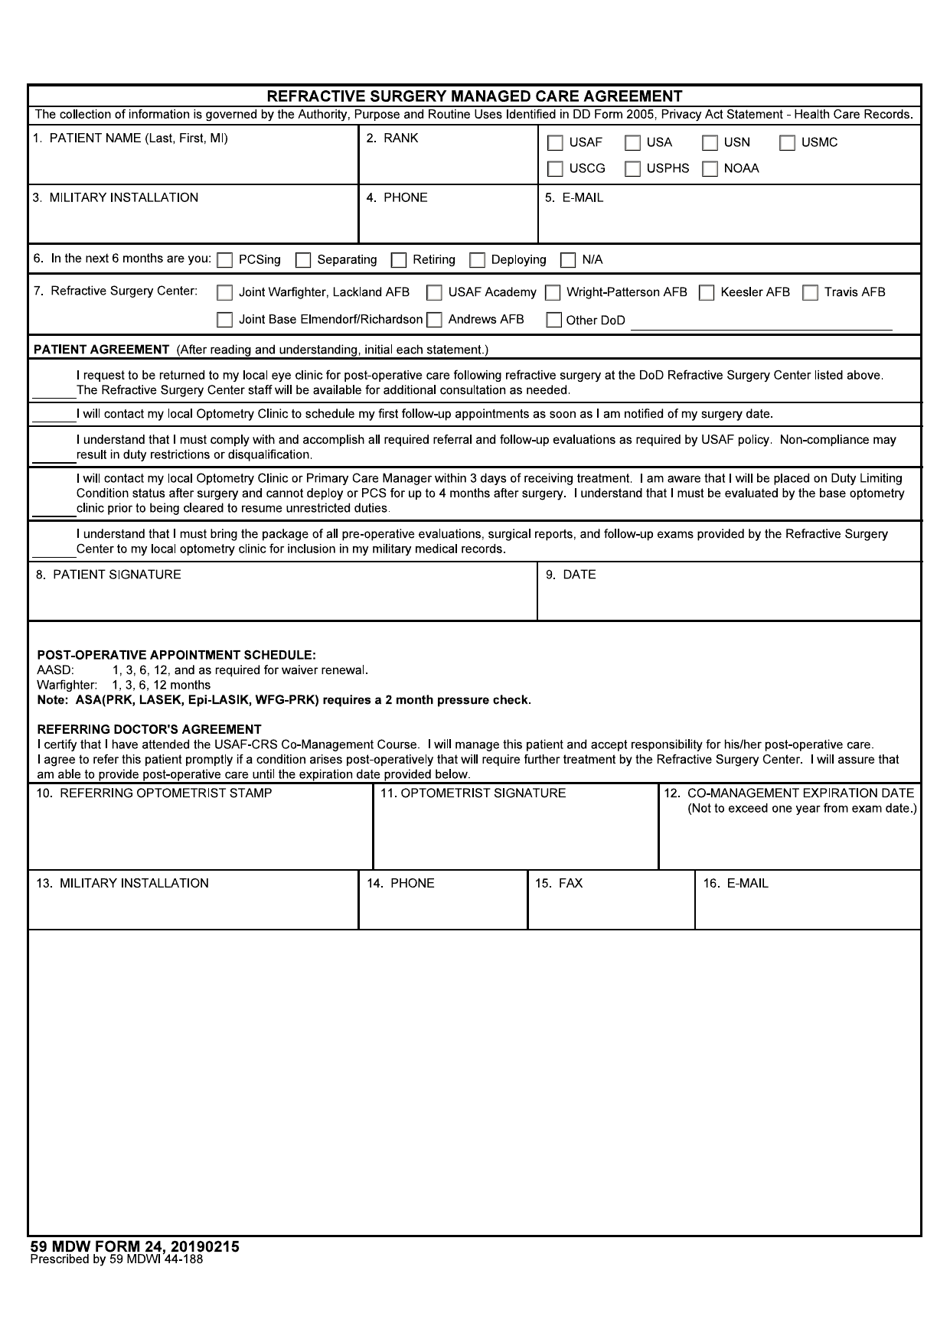 59 MDW Form 24 Refractive Surgery Managed Care Agreement, Page 1